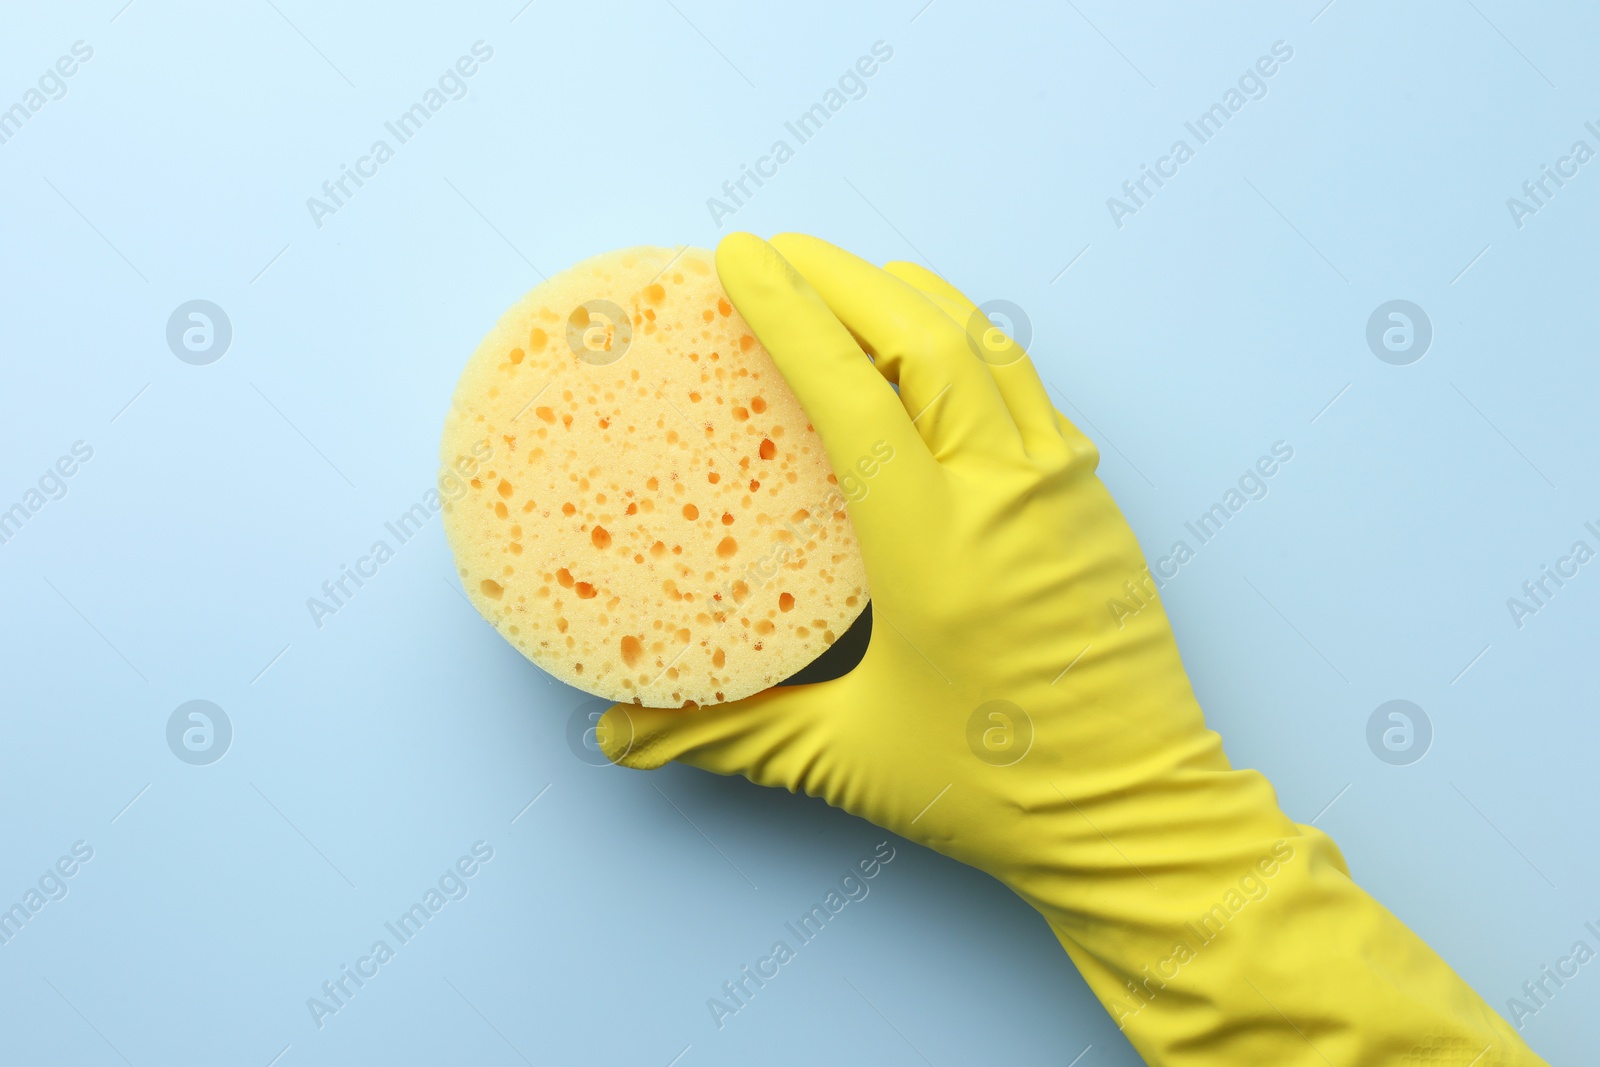 Photo of Cleaner in rubber glove holding new yellow sponge on light blue background, top view.